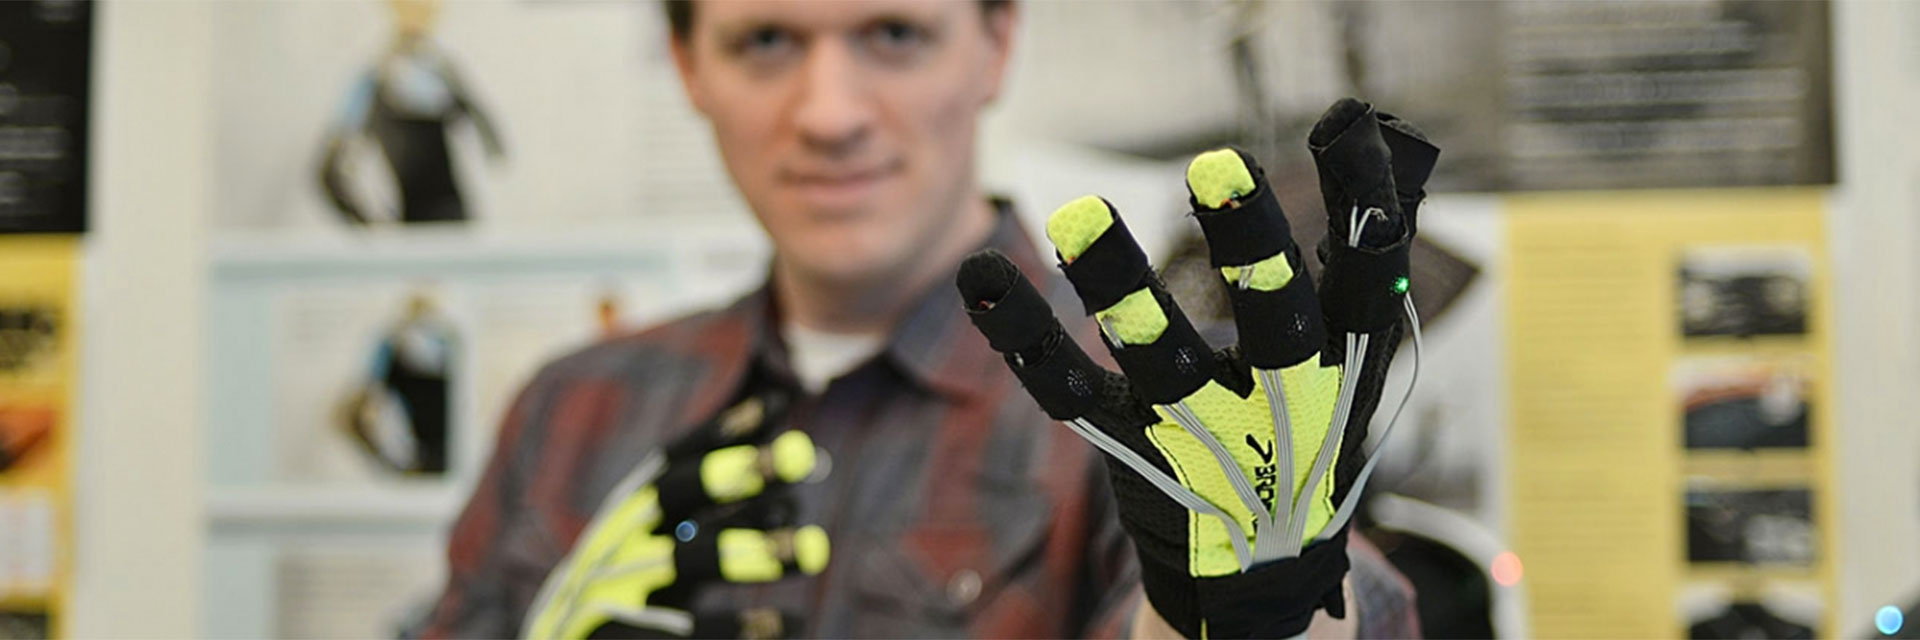 An industrial design student researching wearable technologies wears yellow and black haptic gloves.